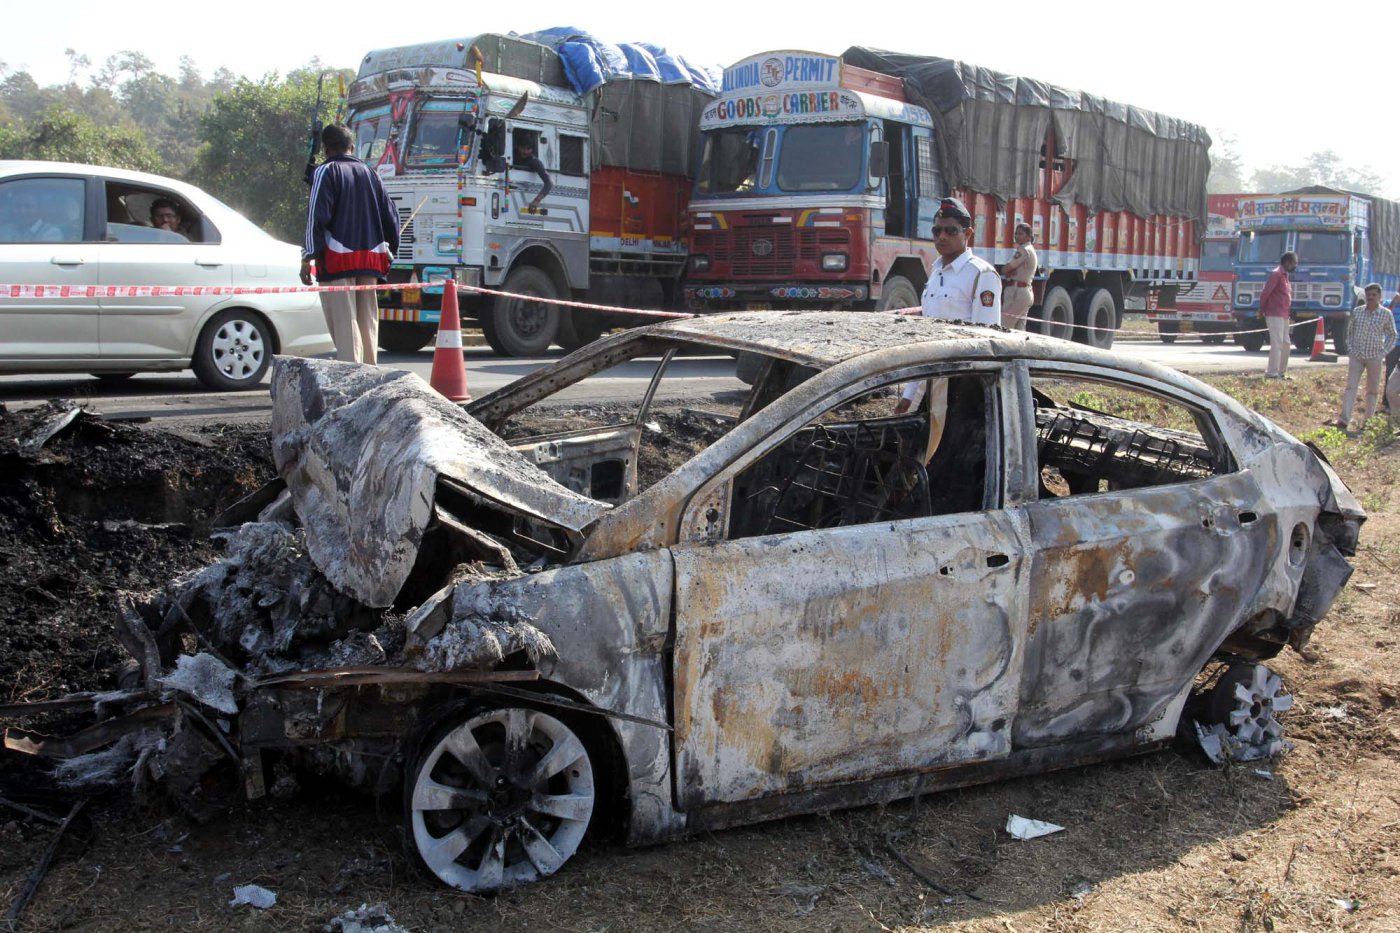 A charred car stands at the accident spot on the Mumbai-Ahmedabad highway near Manor police station following the collision between a tanker containing diesel and a luxury bus on Jan. 29, 2014, in Mumbai, India. (Praful Gangurde—Hindustan Times/Getty Images)